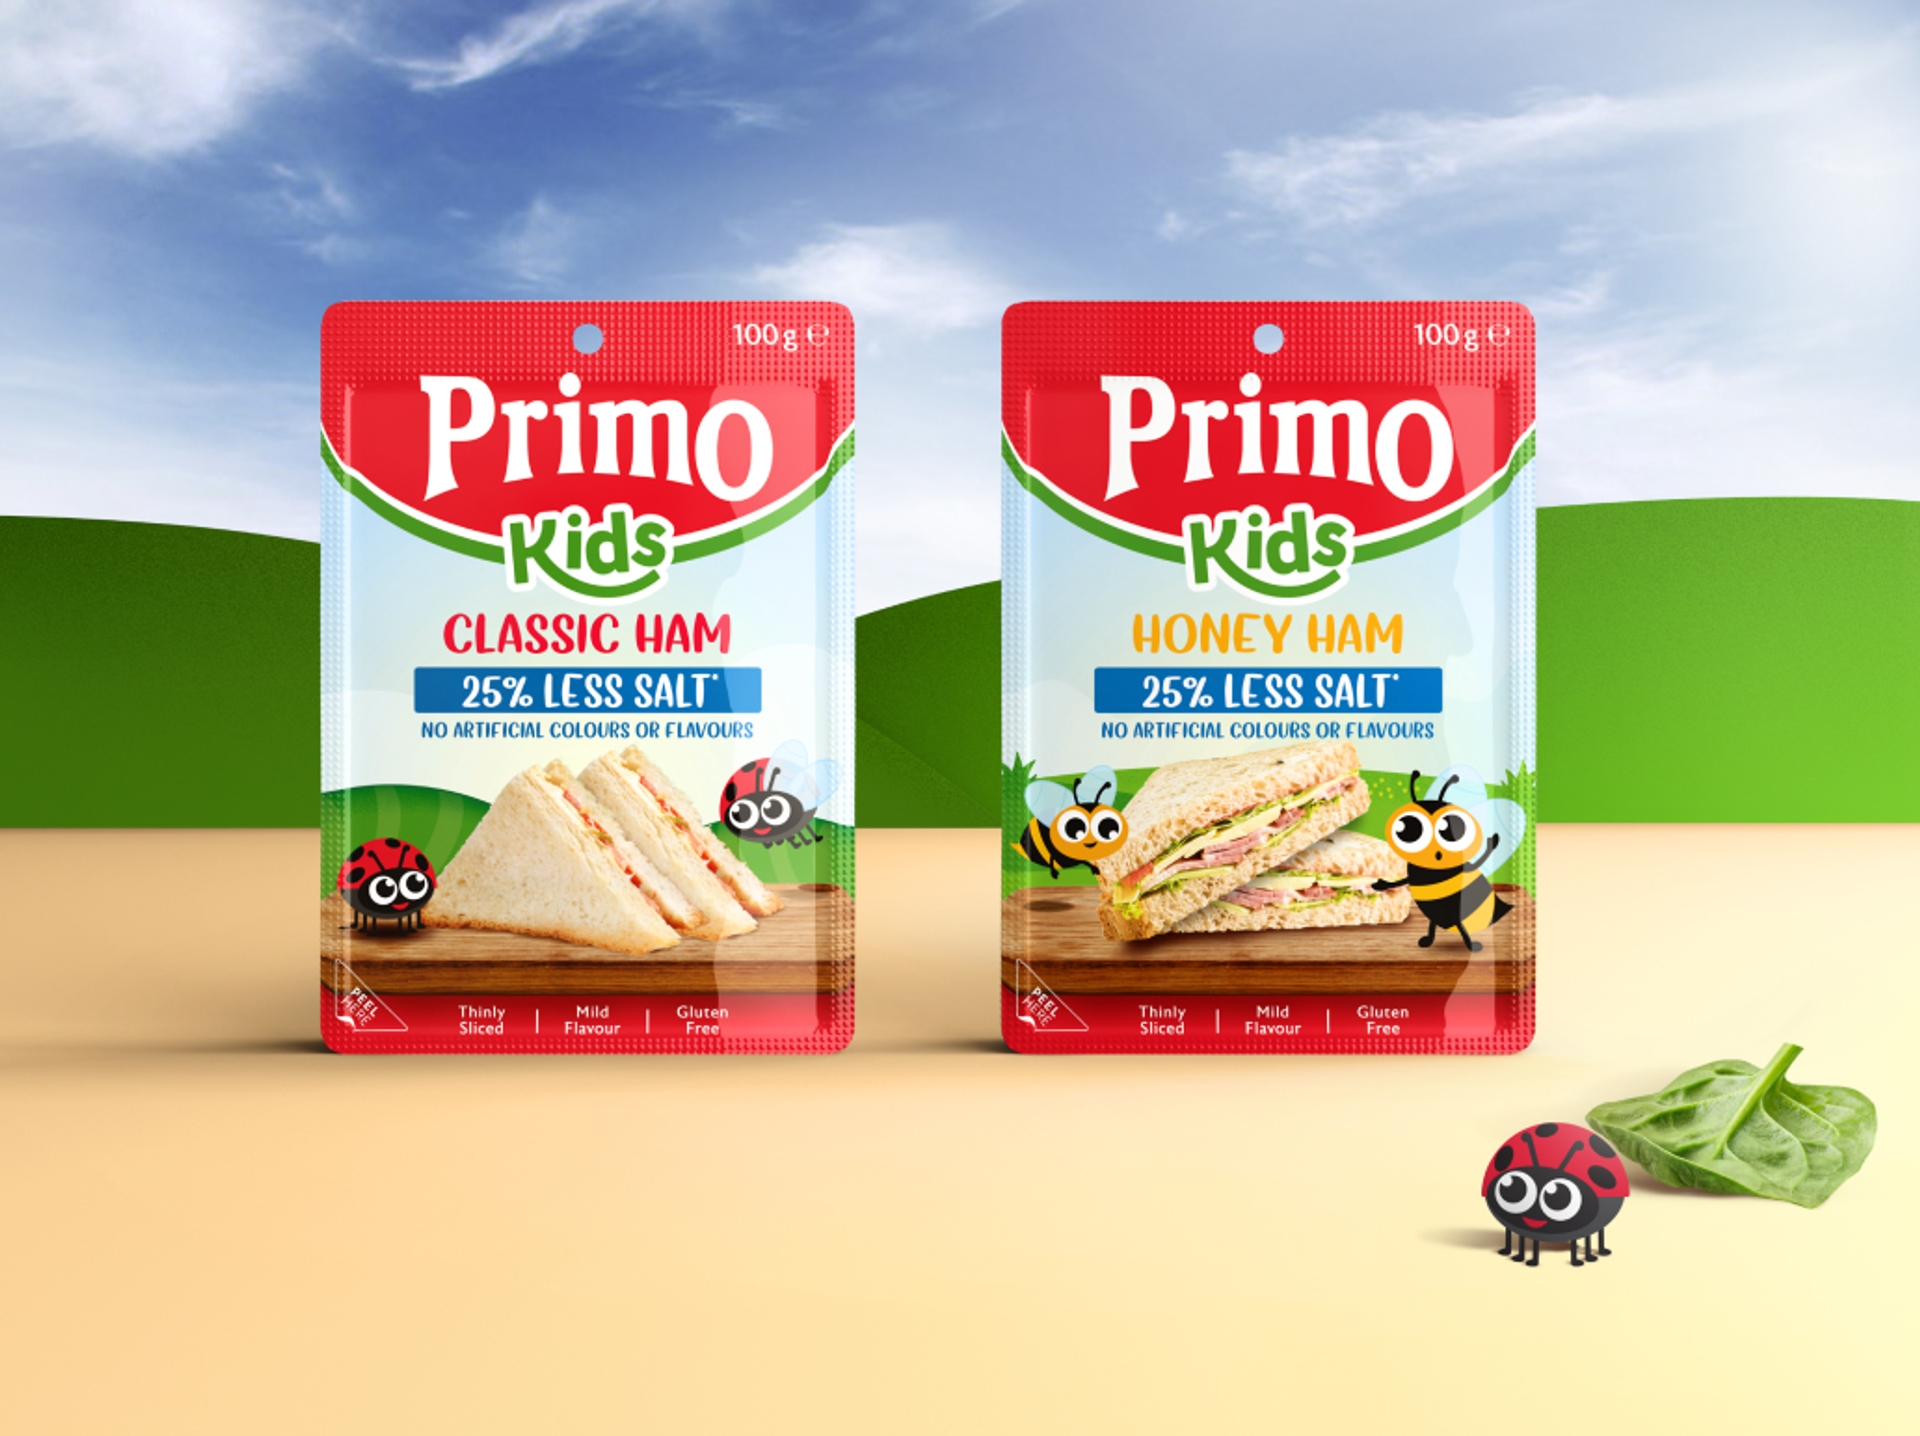 Packaging design for meat brand Primo Kids Classic Ham and Honey Ham packaging design created by Our Revolution